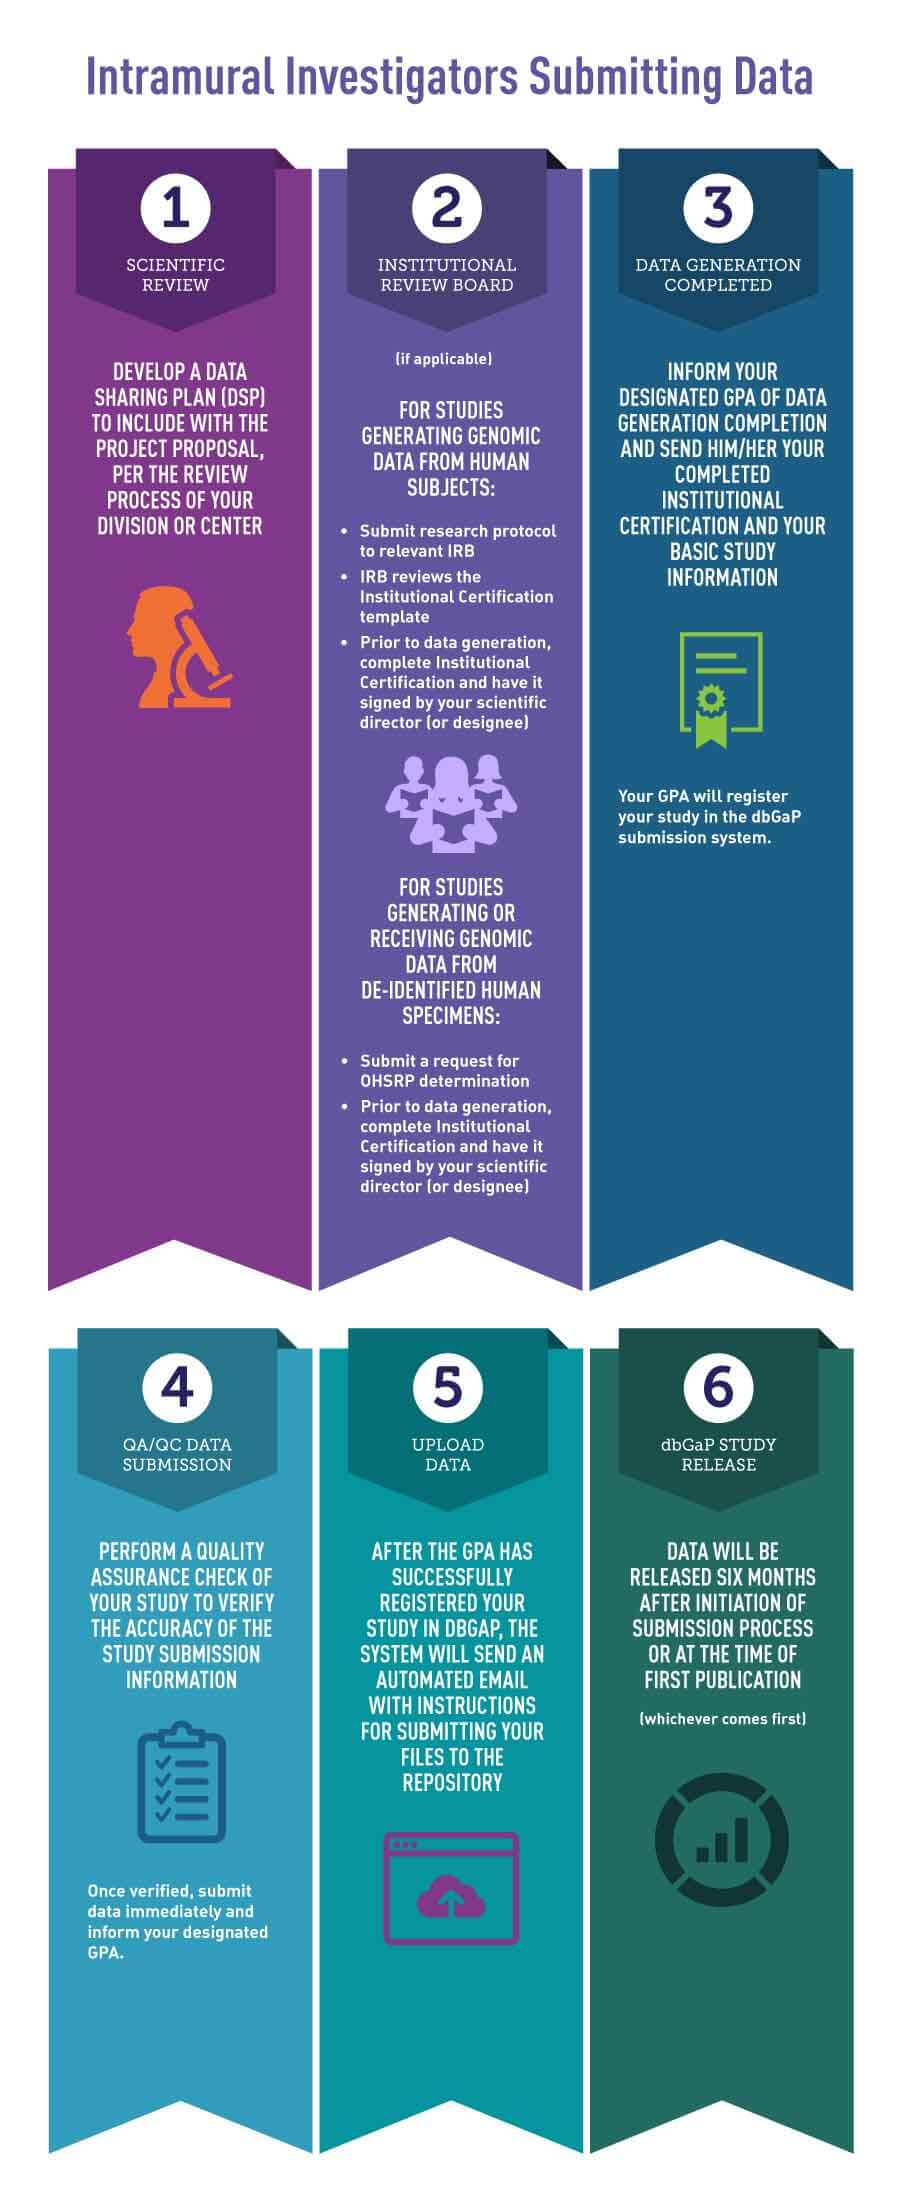 Infographic displaying 6 steps NCI intramural investigators must take to submit data to NCI repositories. From the top left, going to the right, the steps are: 1. Prepare and submit a data sharing plan (submit the plan with your project proprosal). 2. Submit Institutional certification with appropriate signatures to Program Officer or GPA. For studies generating genomic data from human subjects, submit your research protocl to the IRB who will review the institutional certification. Before you generate data